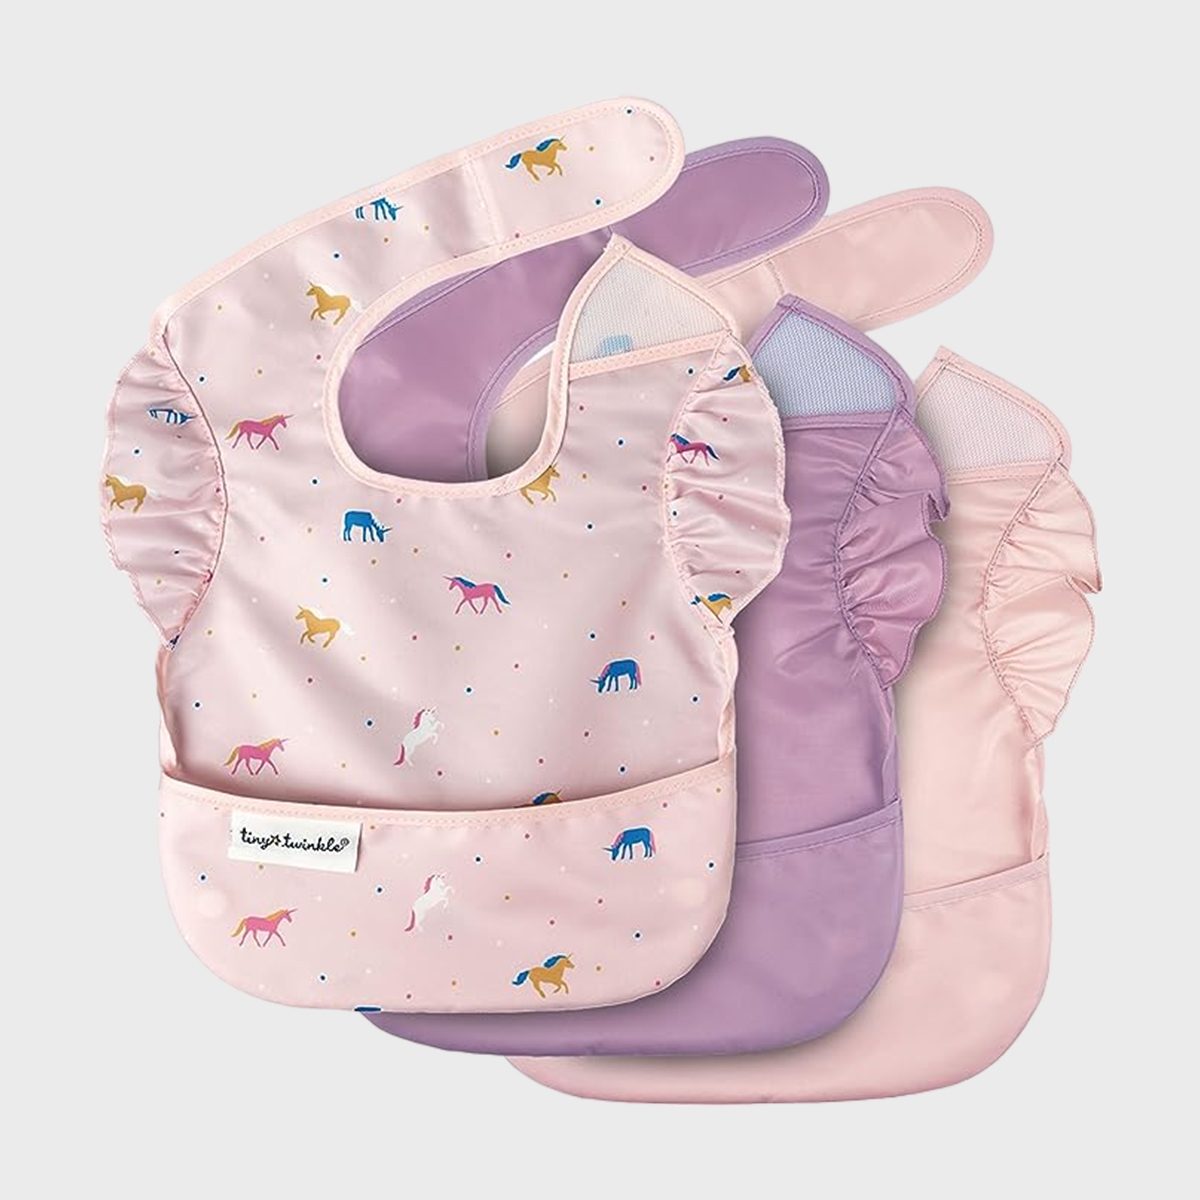 <p>Cute, easy-to-wash <a href="https://www.amazon.com/Tiny-Twinkle-Mess-Proof-Easy-Pack/dp/B0C7Z74WGC" rel="noopener noreferrer">baby bibs</a> are something every new parent uses, whether their infant is drooling from incoming teeth or just starting to take their first few mouthfuls of food. These adorable waterproof bibs come in a budget-friendly set of three and feature such adorable prints and colors that <a href="https://www.rd.com/list/parents-young-children-want-you-know/">new parents</a> will find the photo opportunities irresistible, making it one of the cutest baby gifts to give.</p> <p class="listicle-page__cta-button-shop"><a class="shop-btn" href="https://www.amazon.com/Tiny-Twinkle-Mess-Proof-Easy-Pack/dp/B0C7Z74WGC">Shop Now</a></p>